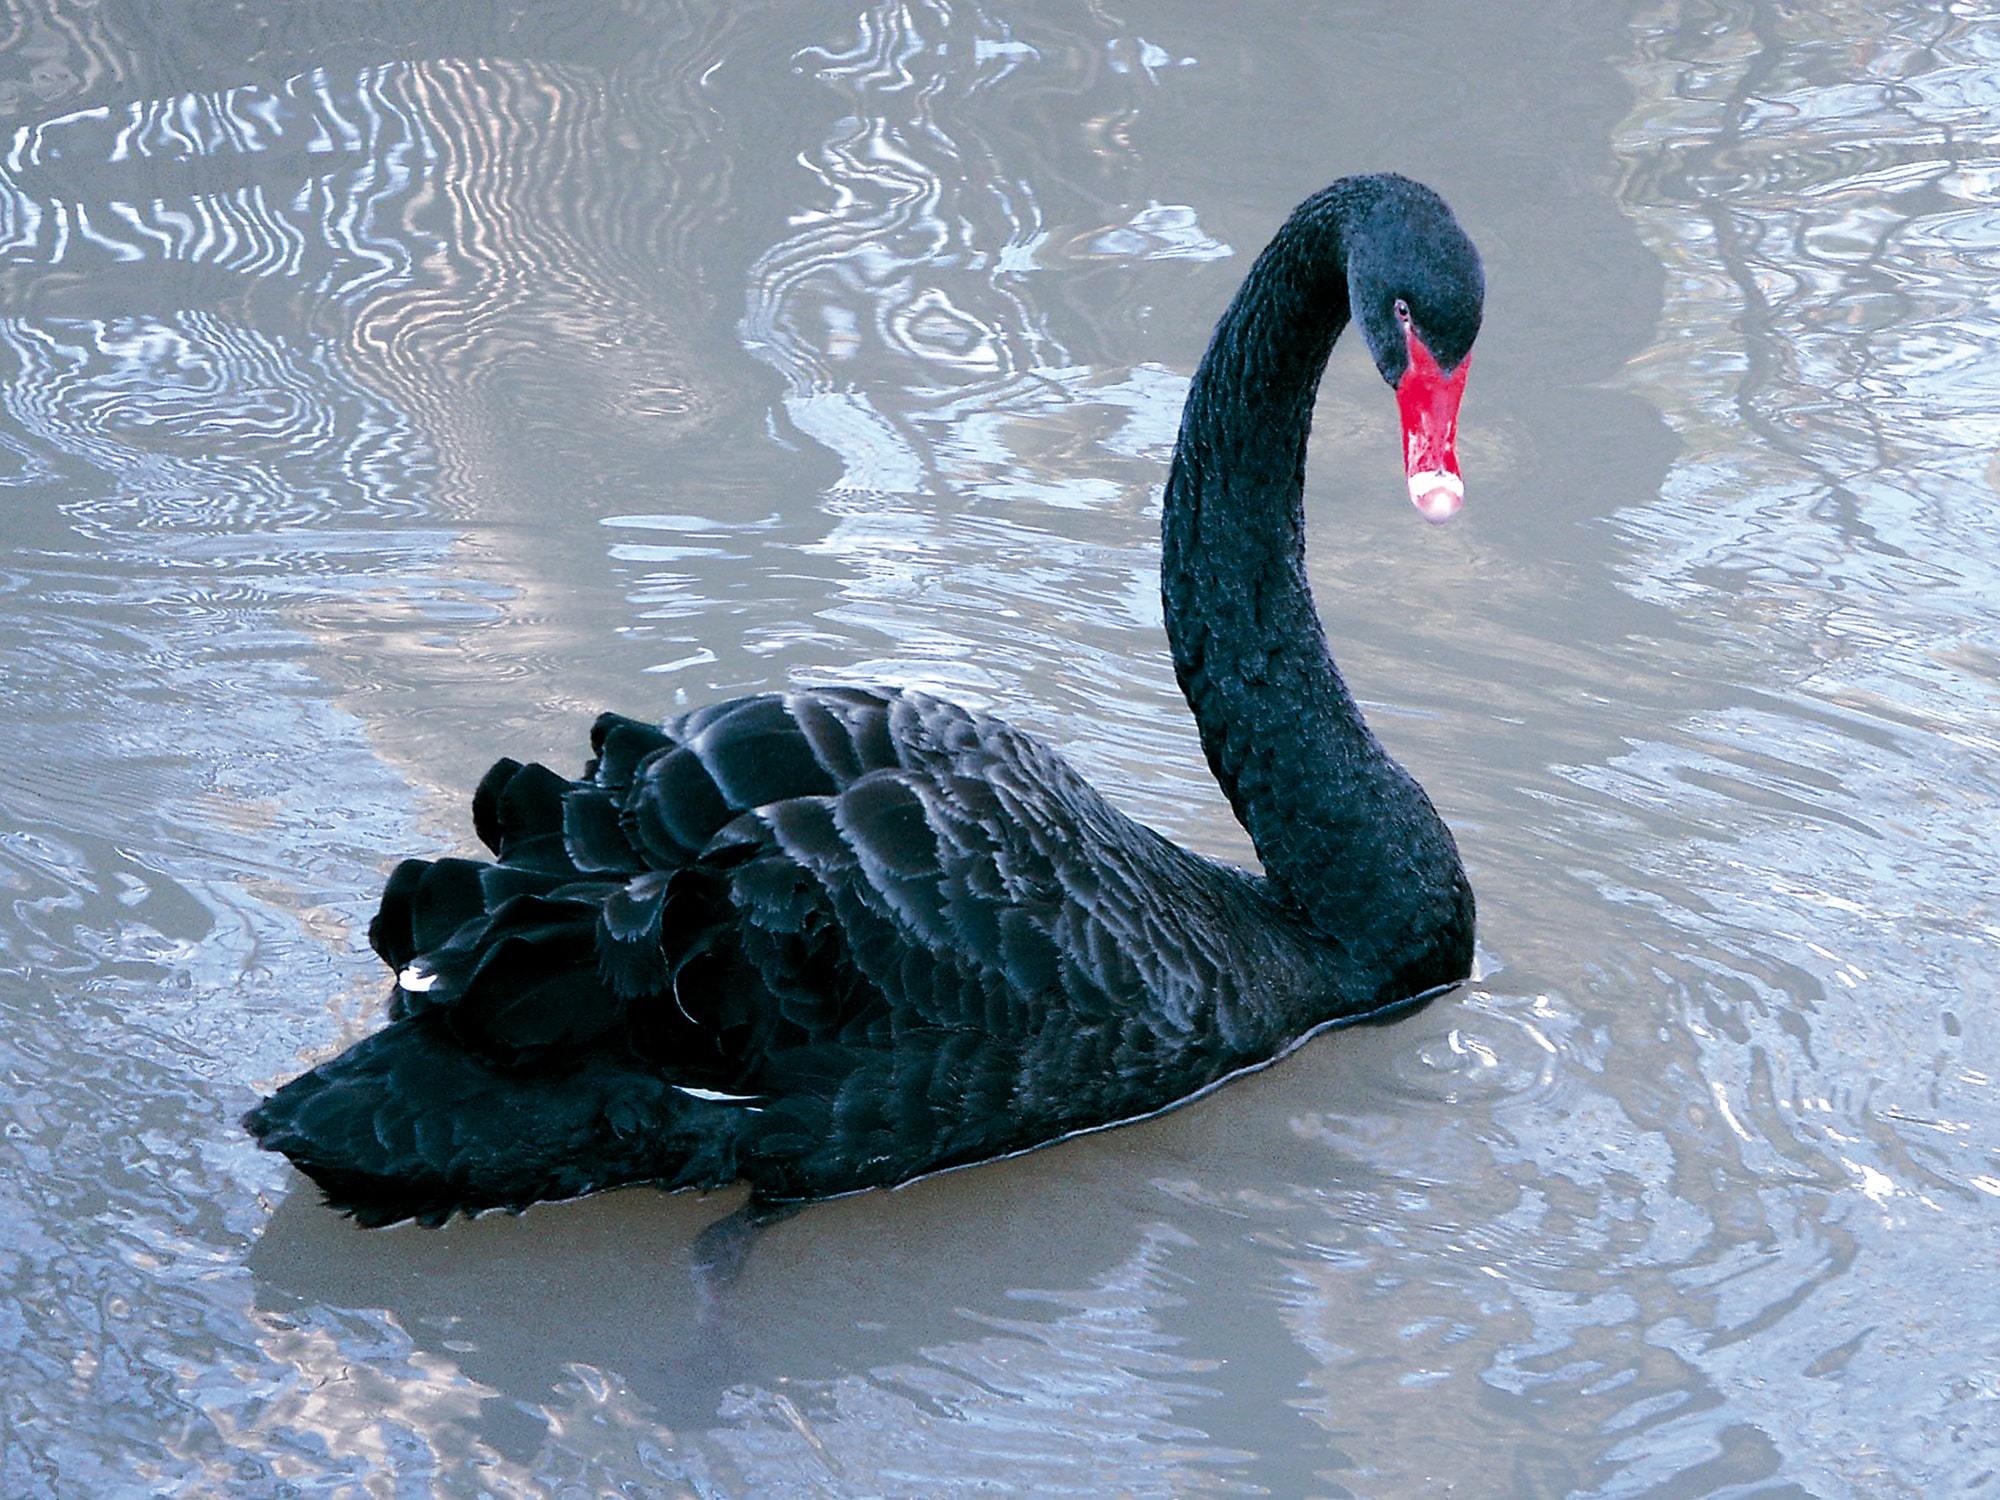 The “Black Swan” author Nassim Taleb says Bitcoin’s “expected value is no higher than 0”